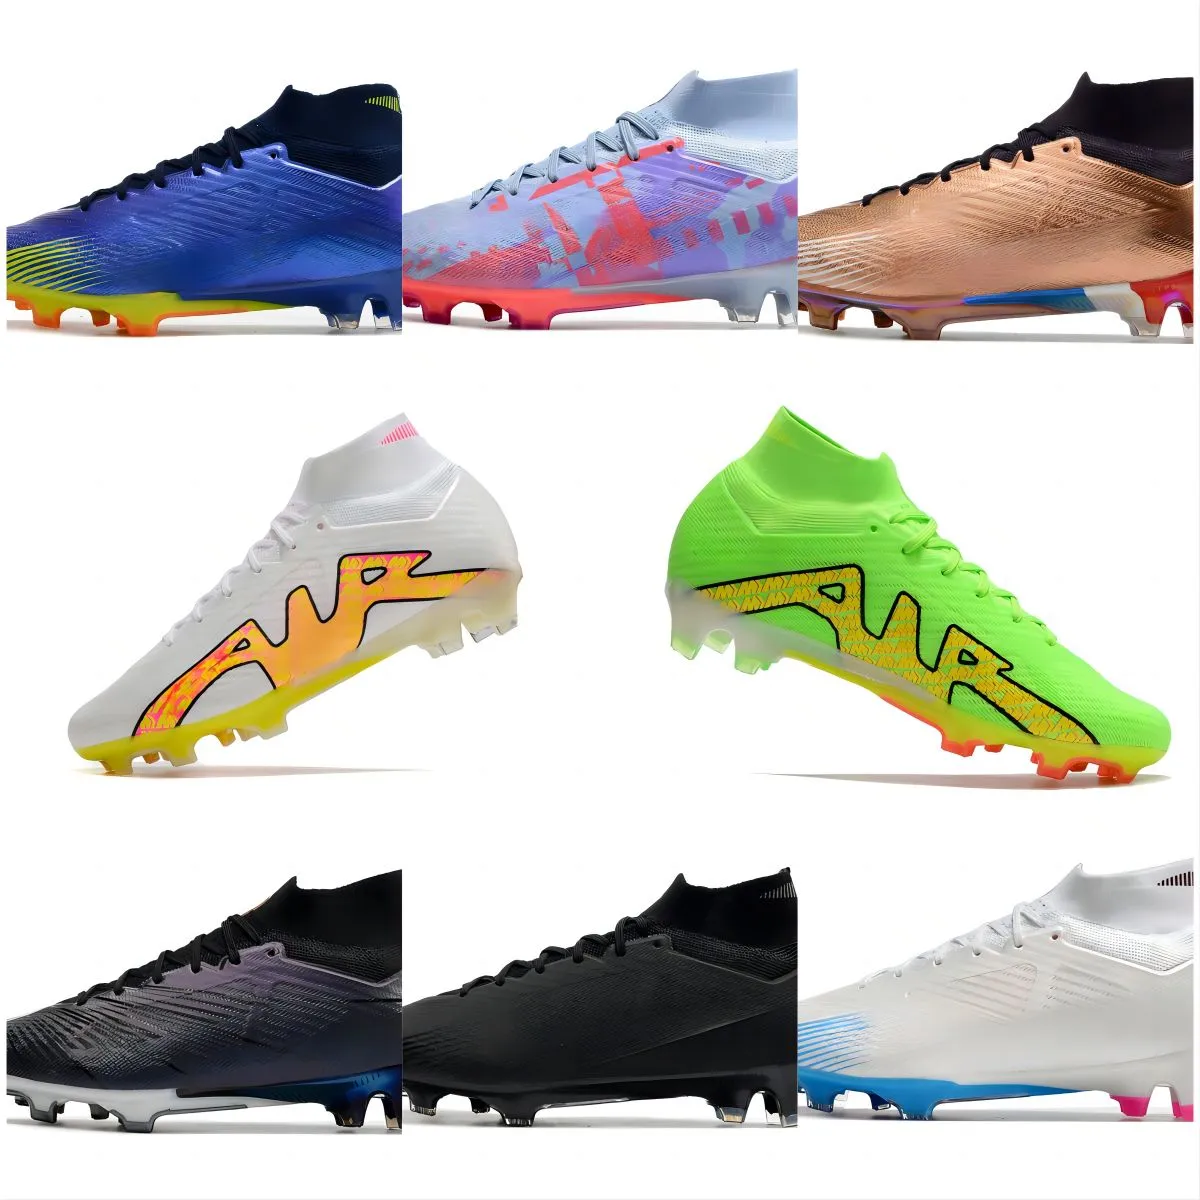 Soccer Shoes Football White Bonded Barely high SHOES Assassin Green Mbappe Pack Cleat Cleats Zooms Mercurial Superfly Blueprint Fg Cristiano size 39-45 with box